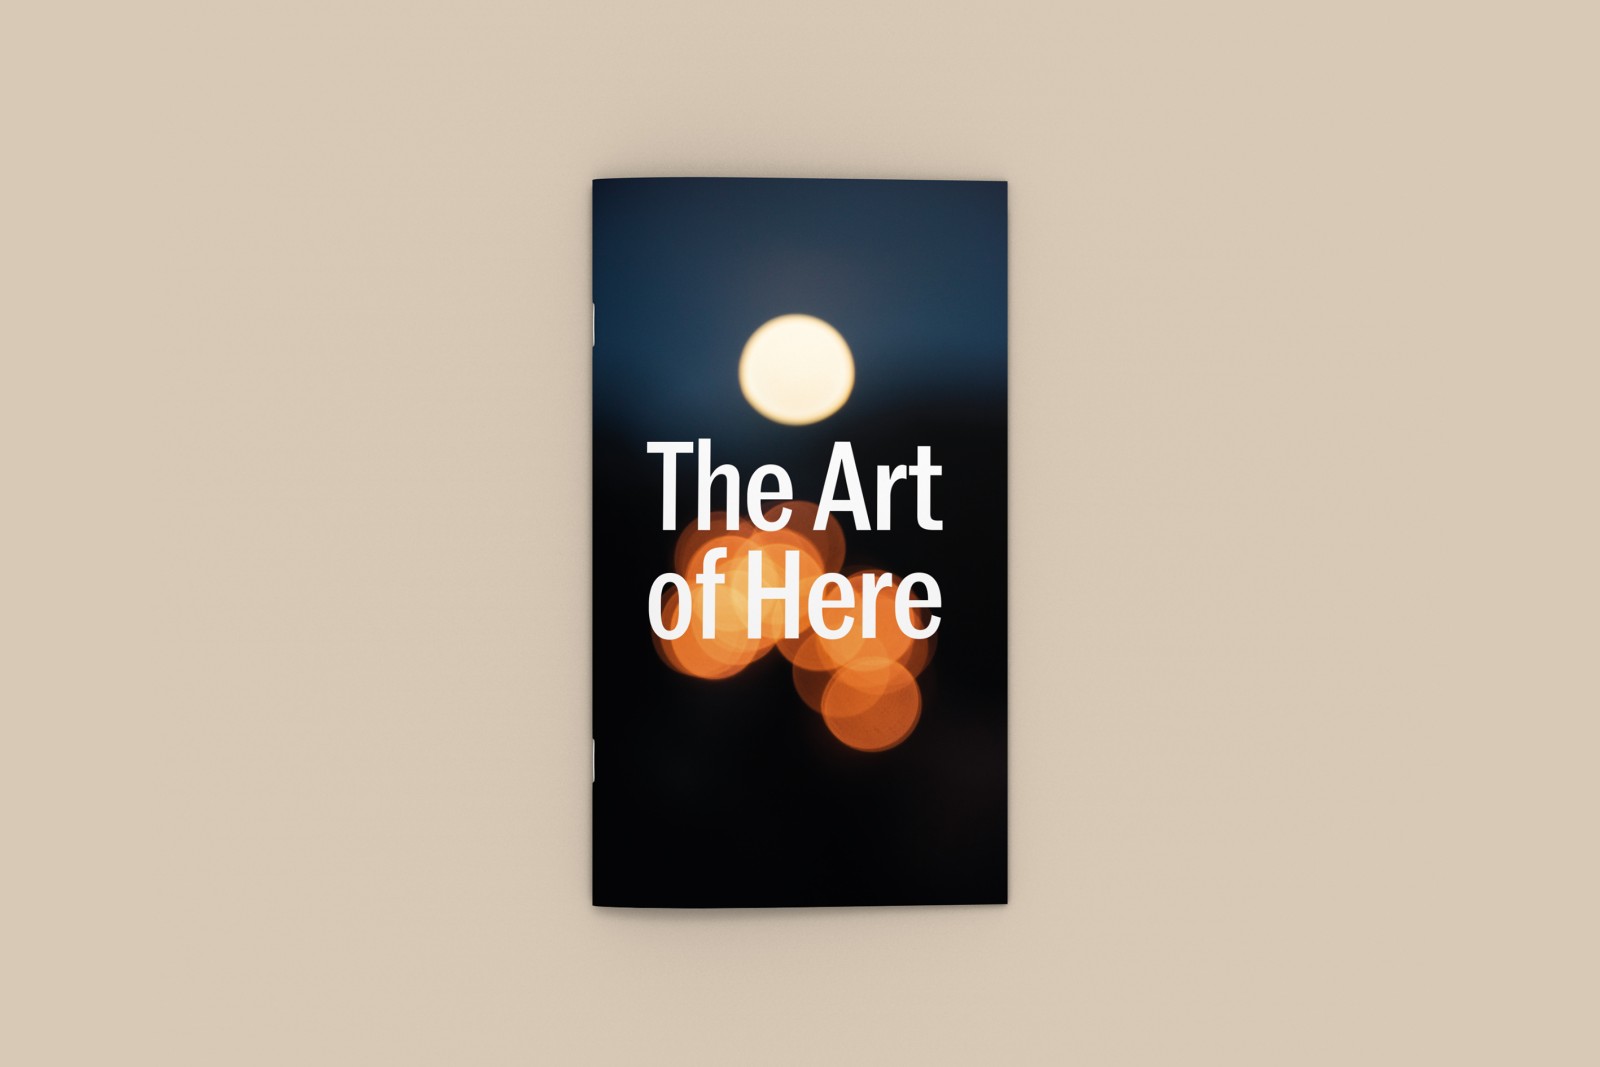 The Art of Here publication